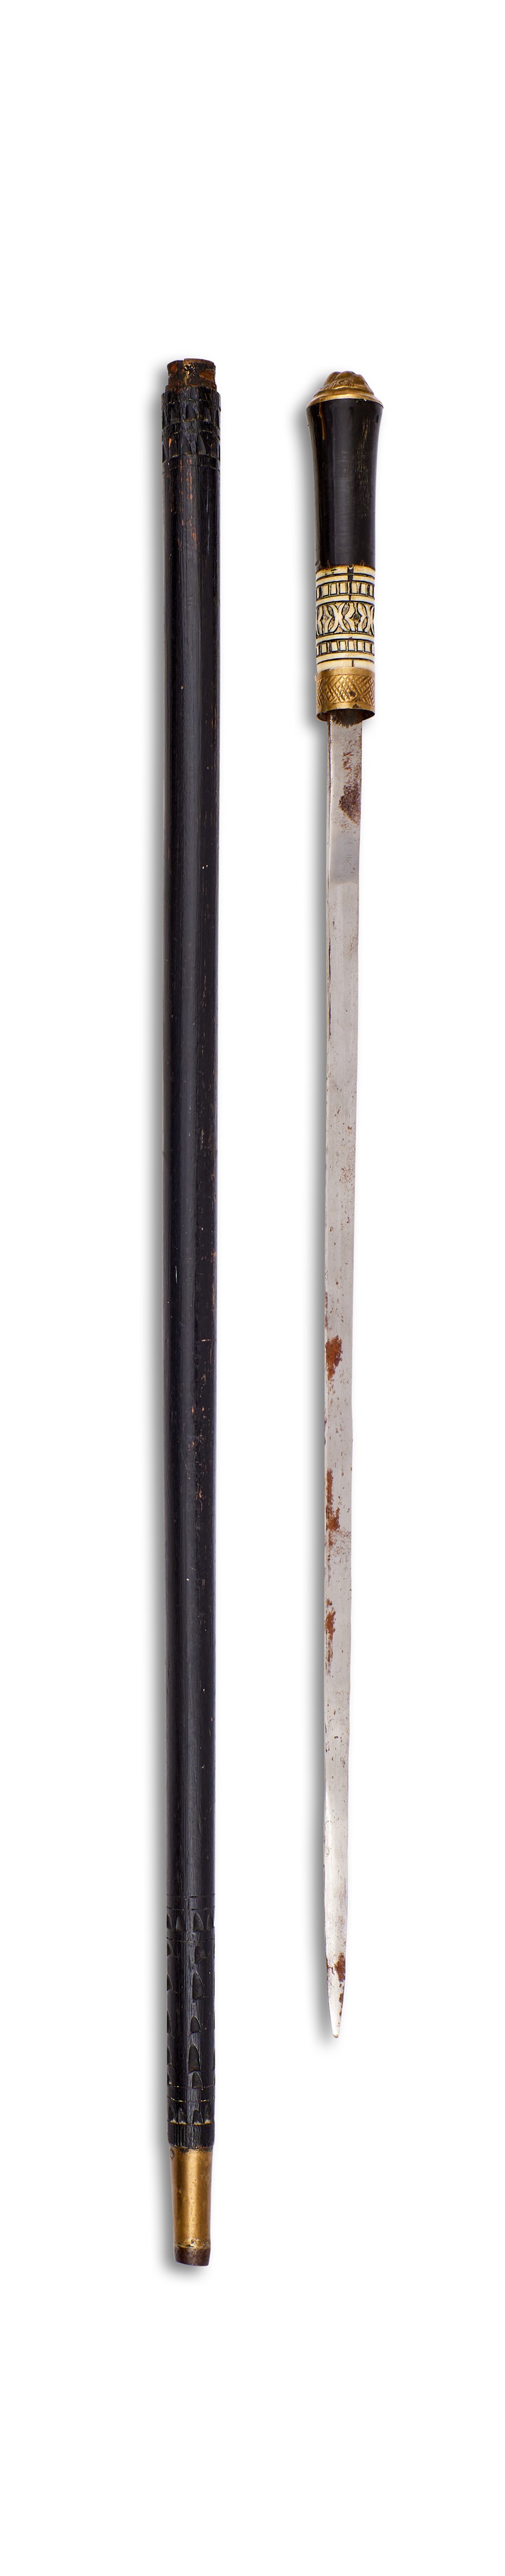 A LATE 19TH / EARLY 20TH CENTURY ANGLO INDIAN SWORD STICK - Image 2 of 2